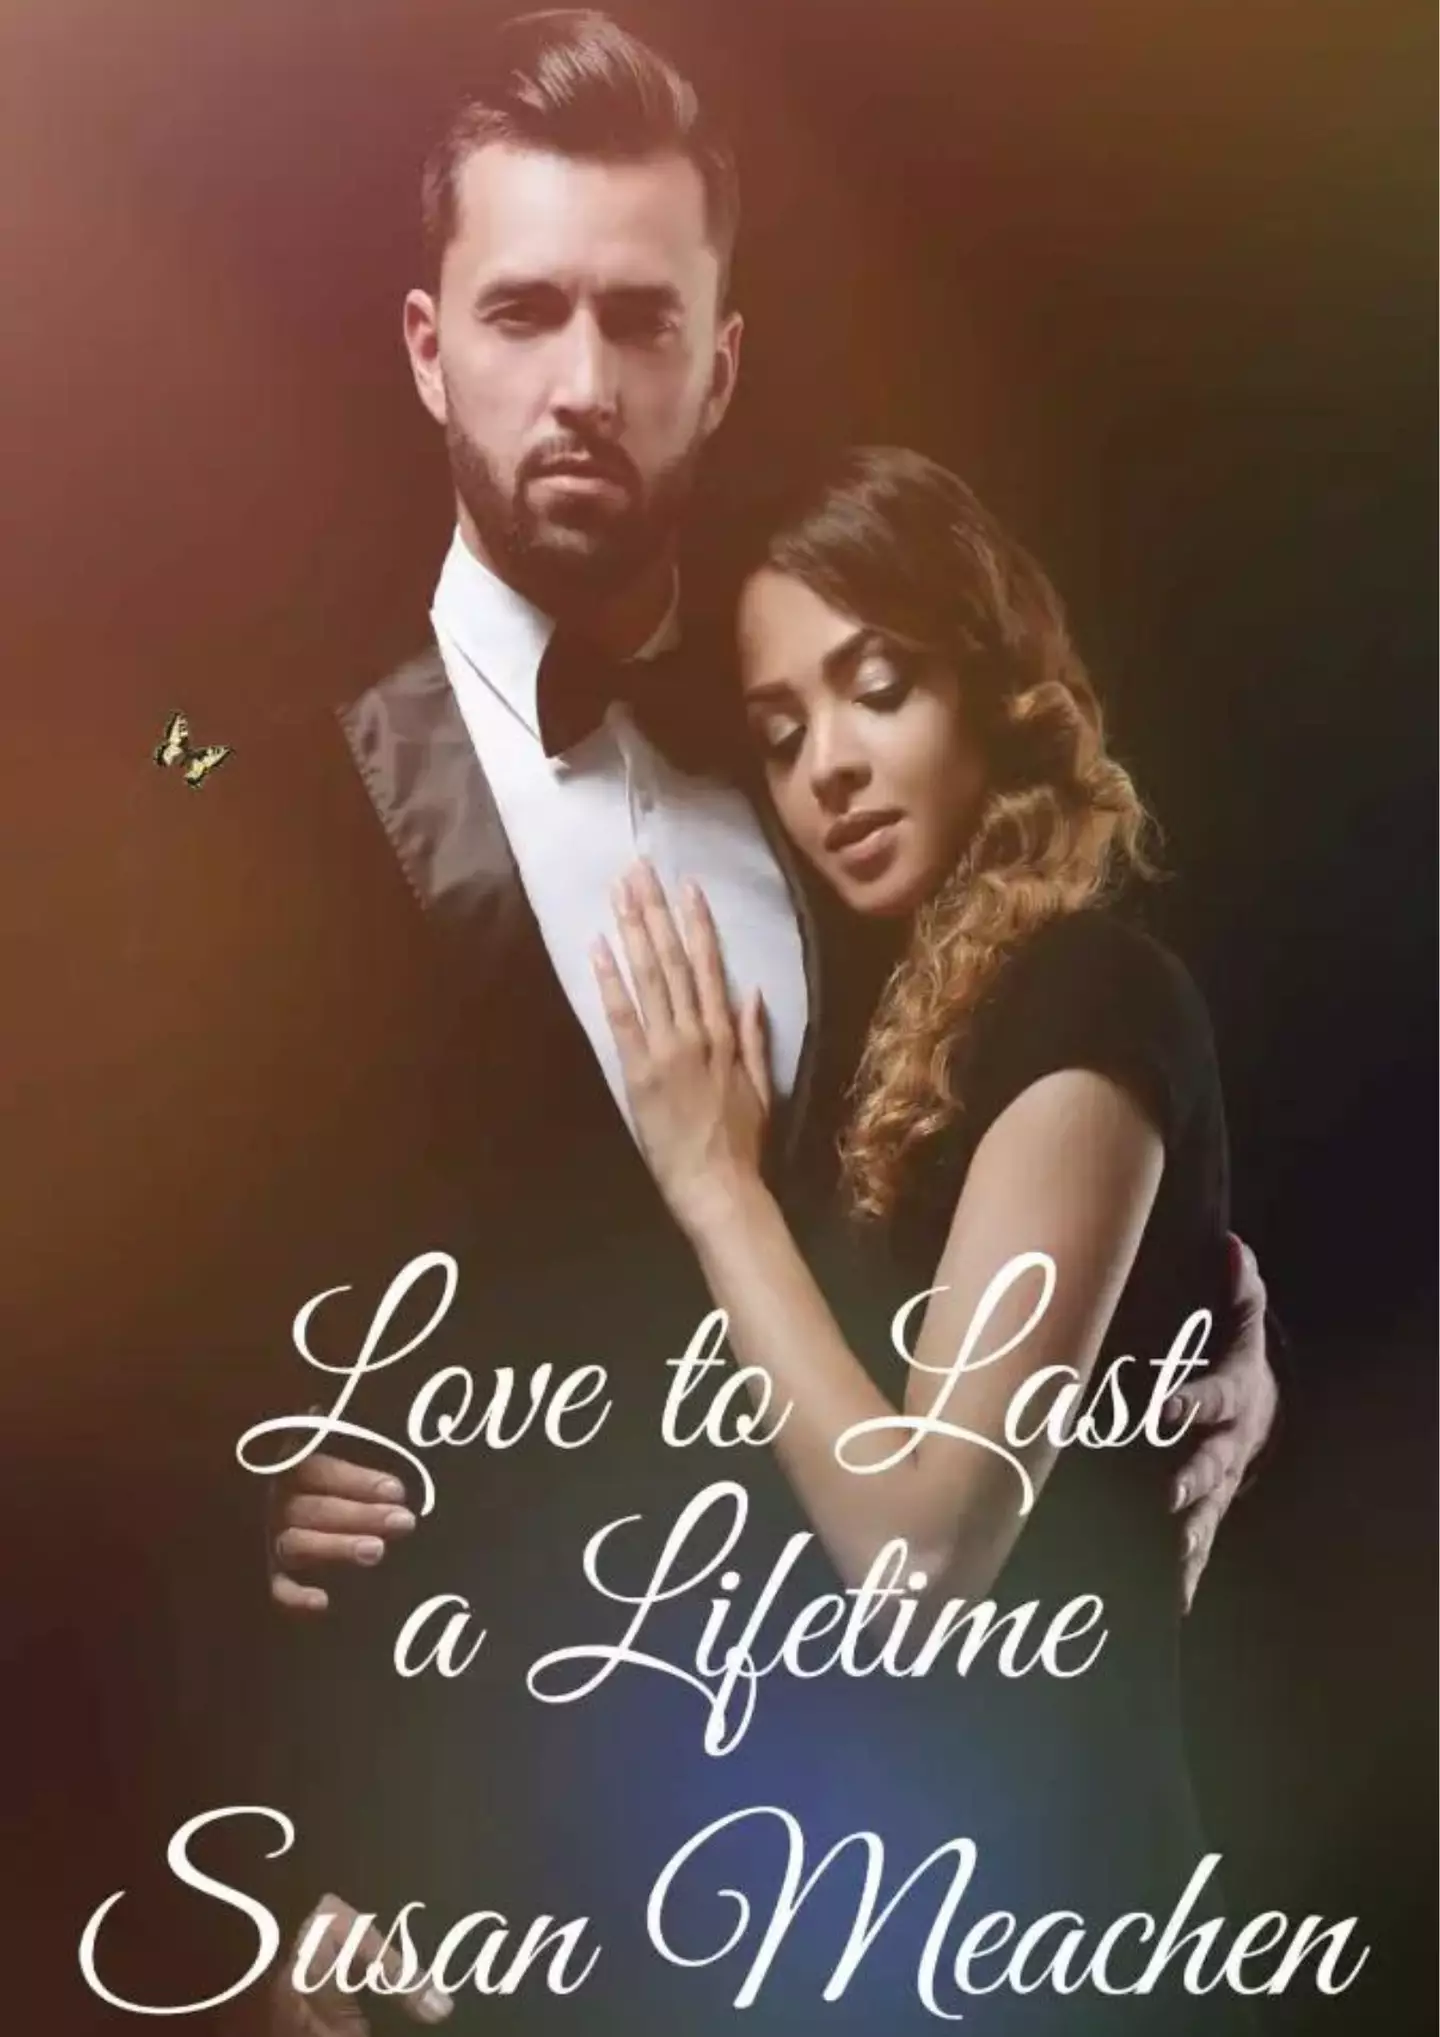 Susan's book, Love to Last a Lifetime, was released soon after her supposed death.